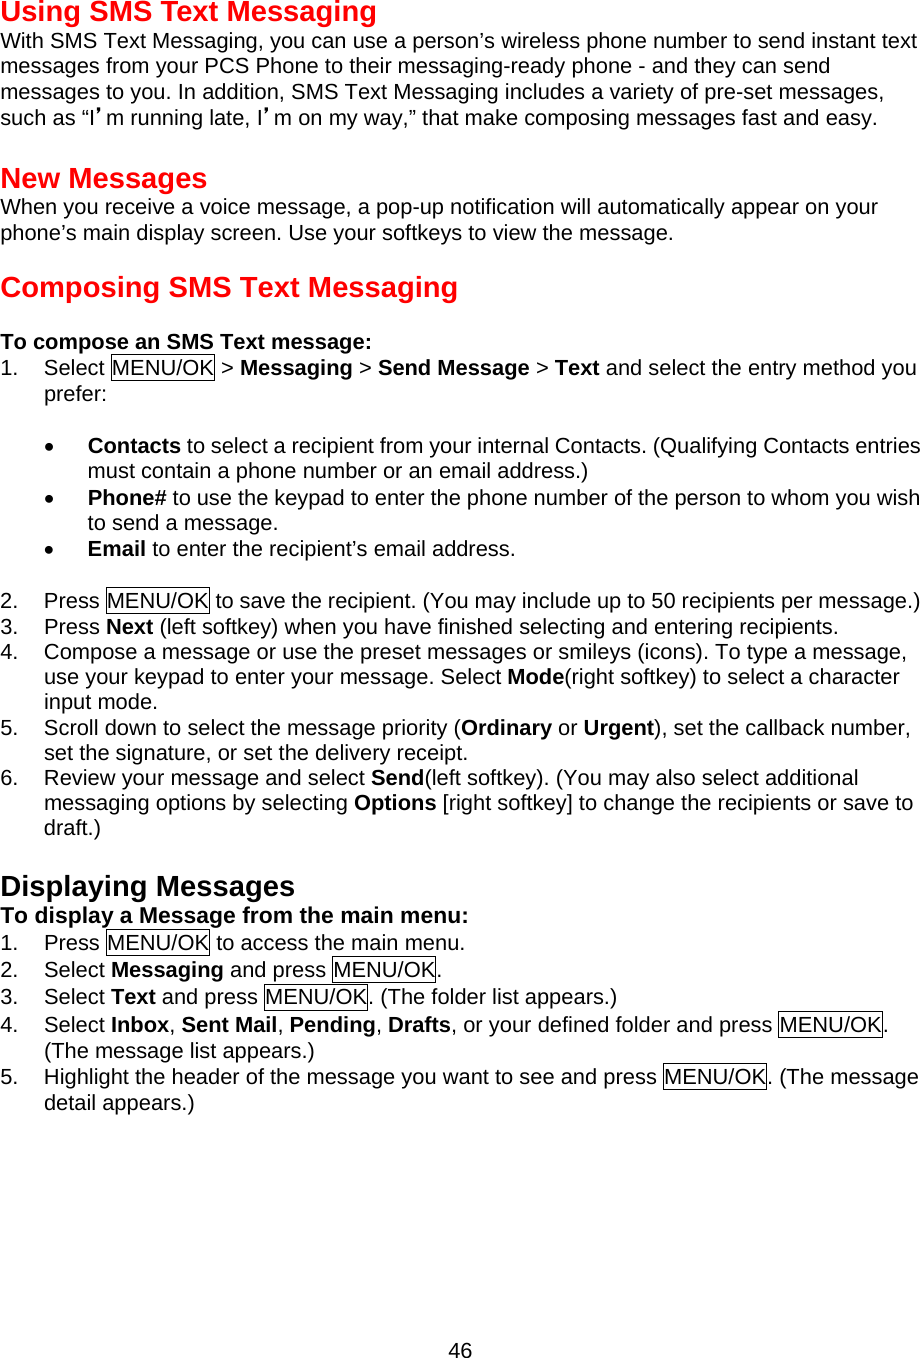 Using SMS Text Messaging With SMS Text Messaging, you can use a person’s wireless phone number to send instant text messages from your PCS Phone to their messaging-ready phone - and they can send messages to you. In addition, SMS Text Messaging includes a variety of pre-set messages, such as “I’m running late, I’m on my way,” that make composing messages fast and easy.  New Messages When you receive a voice message, a pop-up notification will automatically appear on your phone’s main display screen. Use your softkeys to view the message.  Composing SMS Text Messaging  To compose an SMS Text message: 1. Select MENU/OK &gt; Messaging &gt; Send Message &gt; Text and select the entry method you prefer:  •  Contacts to select a recipient from your internal Contacts. (Qualifying Contacts entries must contain a phone number or an email address.) •  Phone# to use the keypad to enter the phone number of the person to whom you wish to send a message. •  Email to enter the recipient’s email address.  2.  Press MENU/OK to save the recipient. (You may include up to 50 recipients per message.) 3. Press Next (left softkey) when you have finished selecting and entering recipients. 4.  Compose a message or use the preset messages or smileys (icons). To type a message, use your keypad to enter your message. Select Mode(right softkey) to select a character input mode. 5.  Scroll down to select the message priority (Ordinary or Urgent), set the callback number, set the signature, or set the delivery receipt. 6.  Review your message and select Send(left softkey). (You may also select additional messaging options by selecting Options [right softkey] to change the recipients or save to draft.)  Displaying Messages To display a Message from the main menu: 1.  Press MENU/OK to access the main menu. 2. Select Messaging and press MENU/OK. 3. Select Text and press MENU/OK. (The folder list appears.) 4. Select Inbox, Sent Mail, Pending, Drafts, or your defined folder and press MENU/OK. (The message list appears.) 5.  Highlight the header of the message you want to see and press MENU/OK. (The message detail appears.)   46